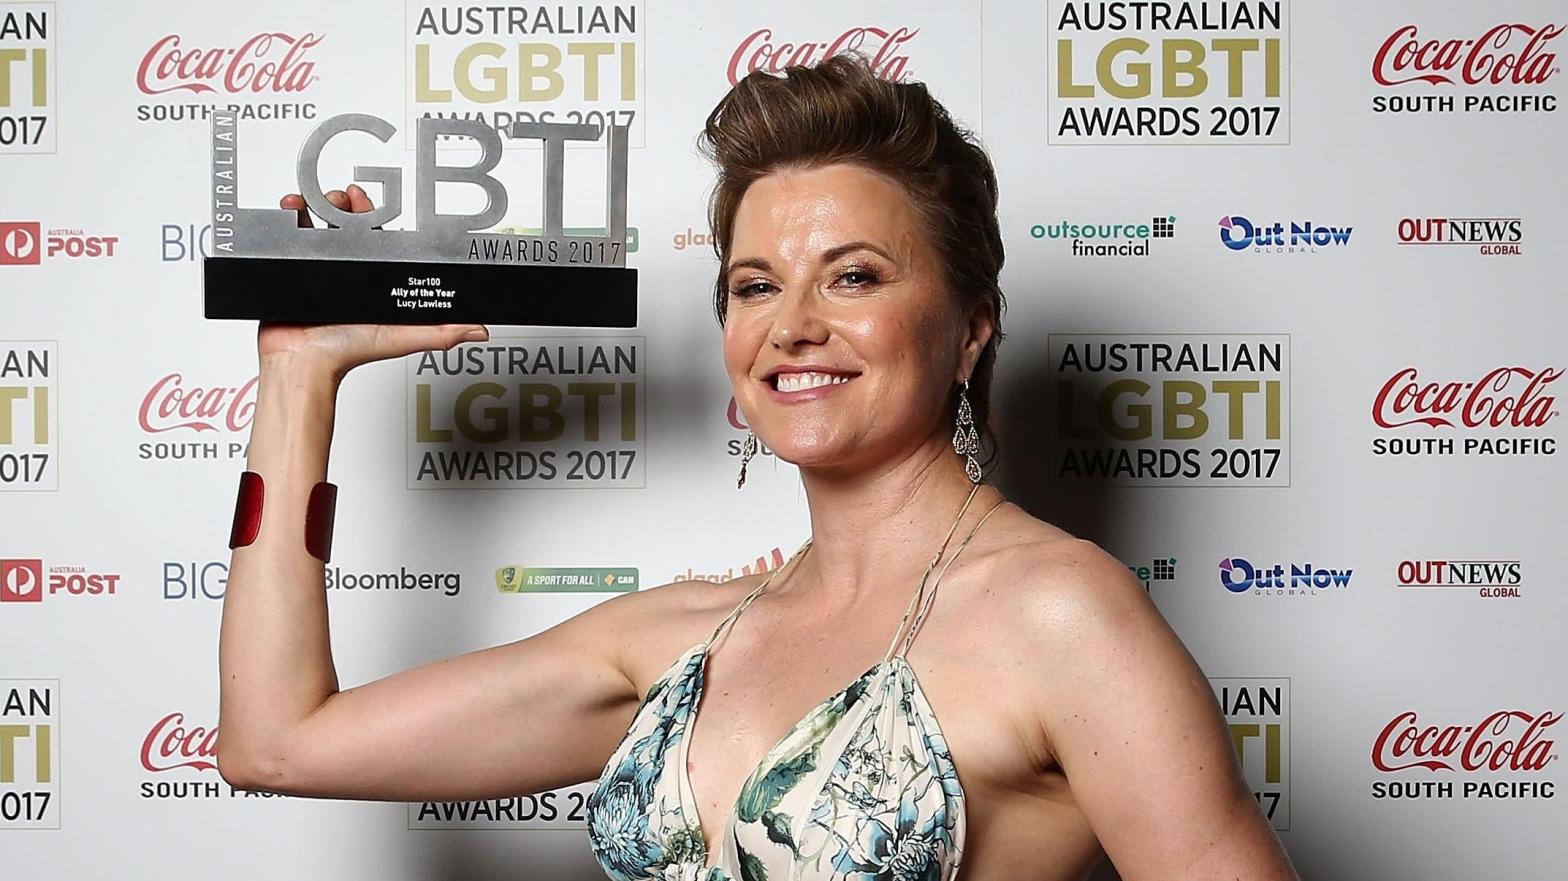 Lucy Lawless at Australian LGBTI Awards in 2017. (Photo: Mark Metcalfe/Getty, Getty Images)